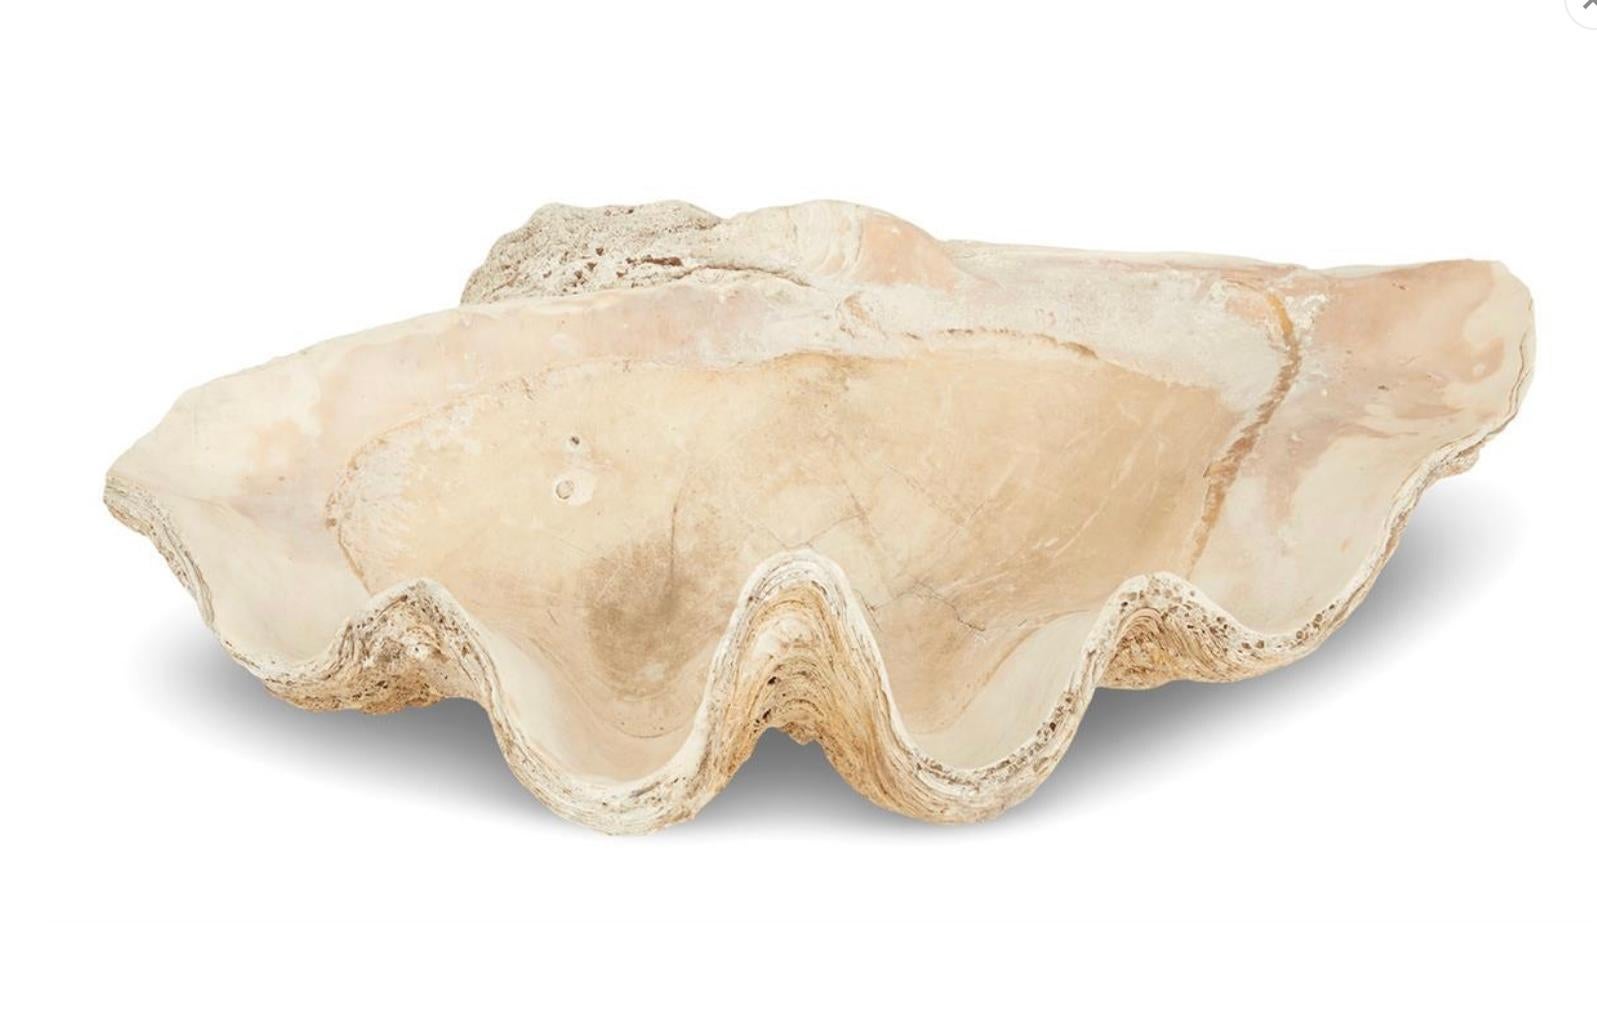 Organic Modern Giant 34 Inch Fossilized Clam Shell For Sale